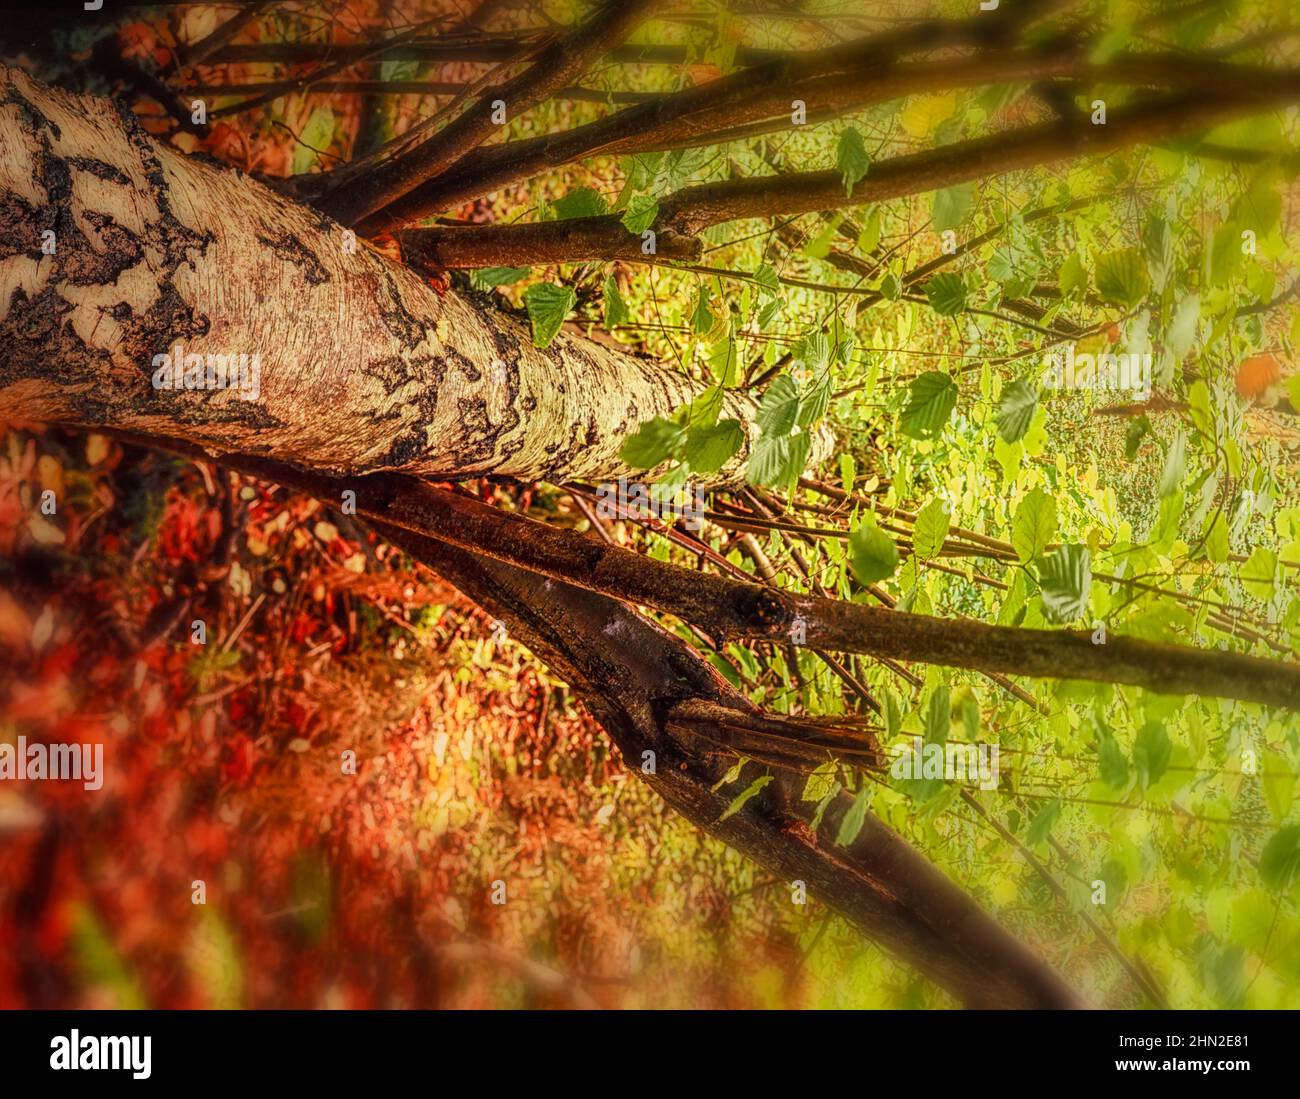 Beautiful natural environment  of fallen tree amongst spring foliage in good light, Stock Photo